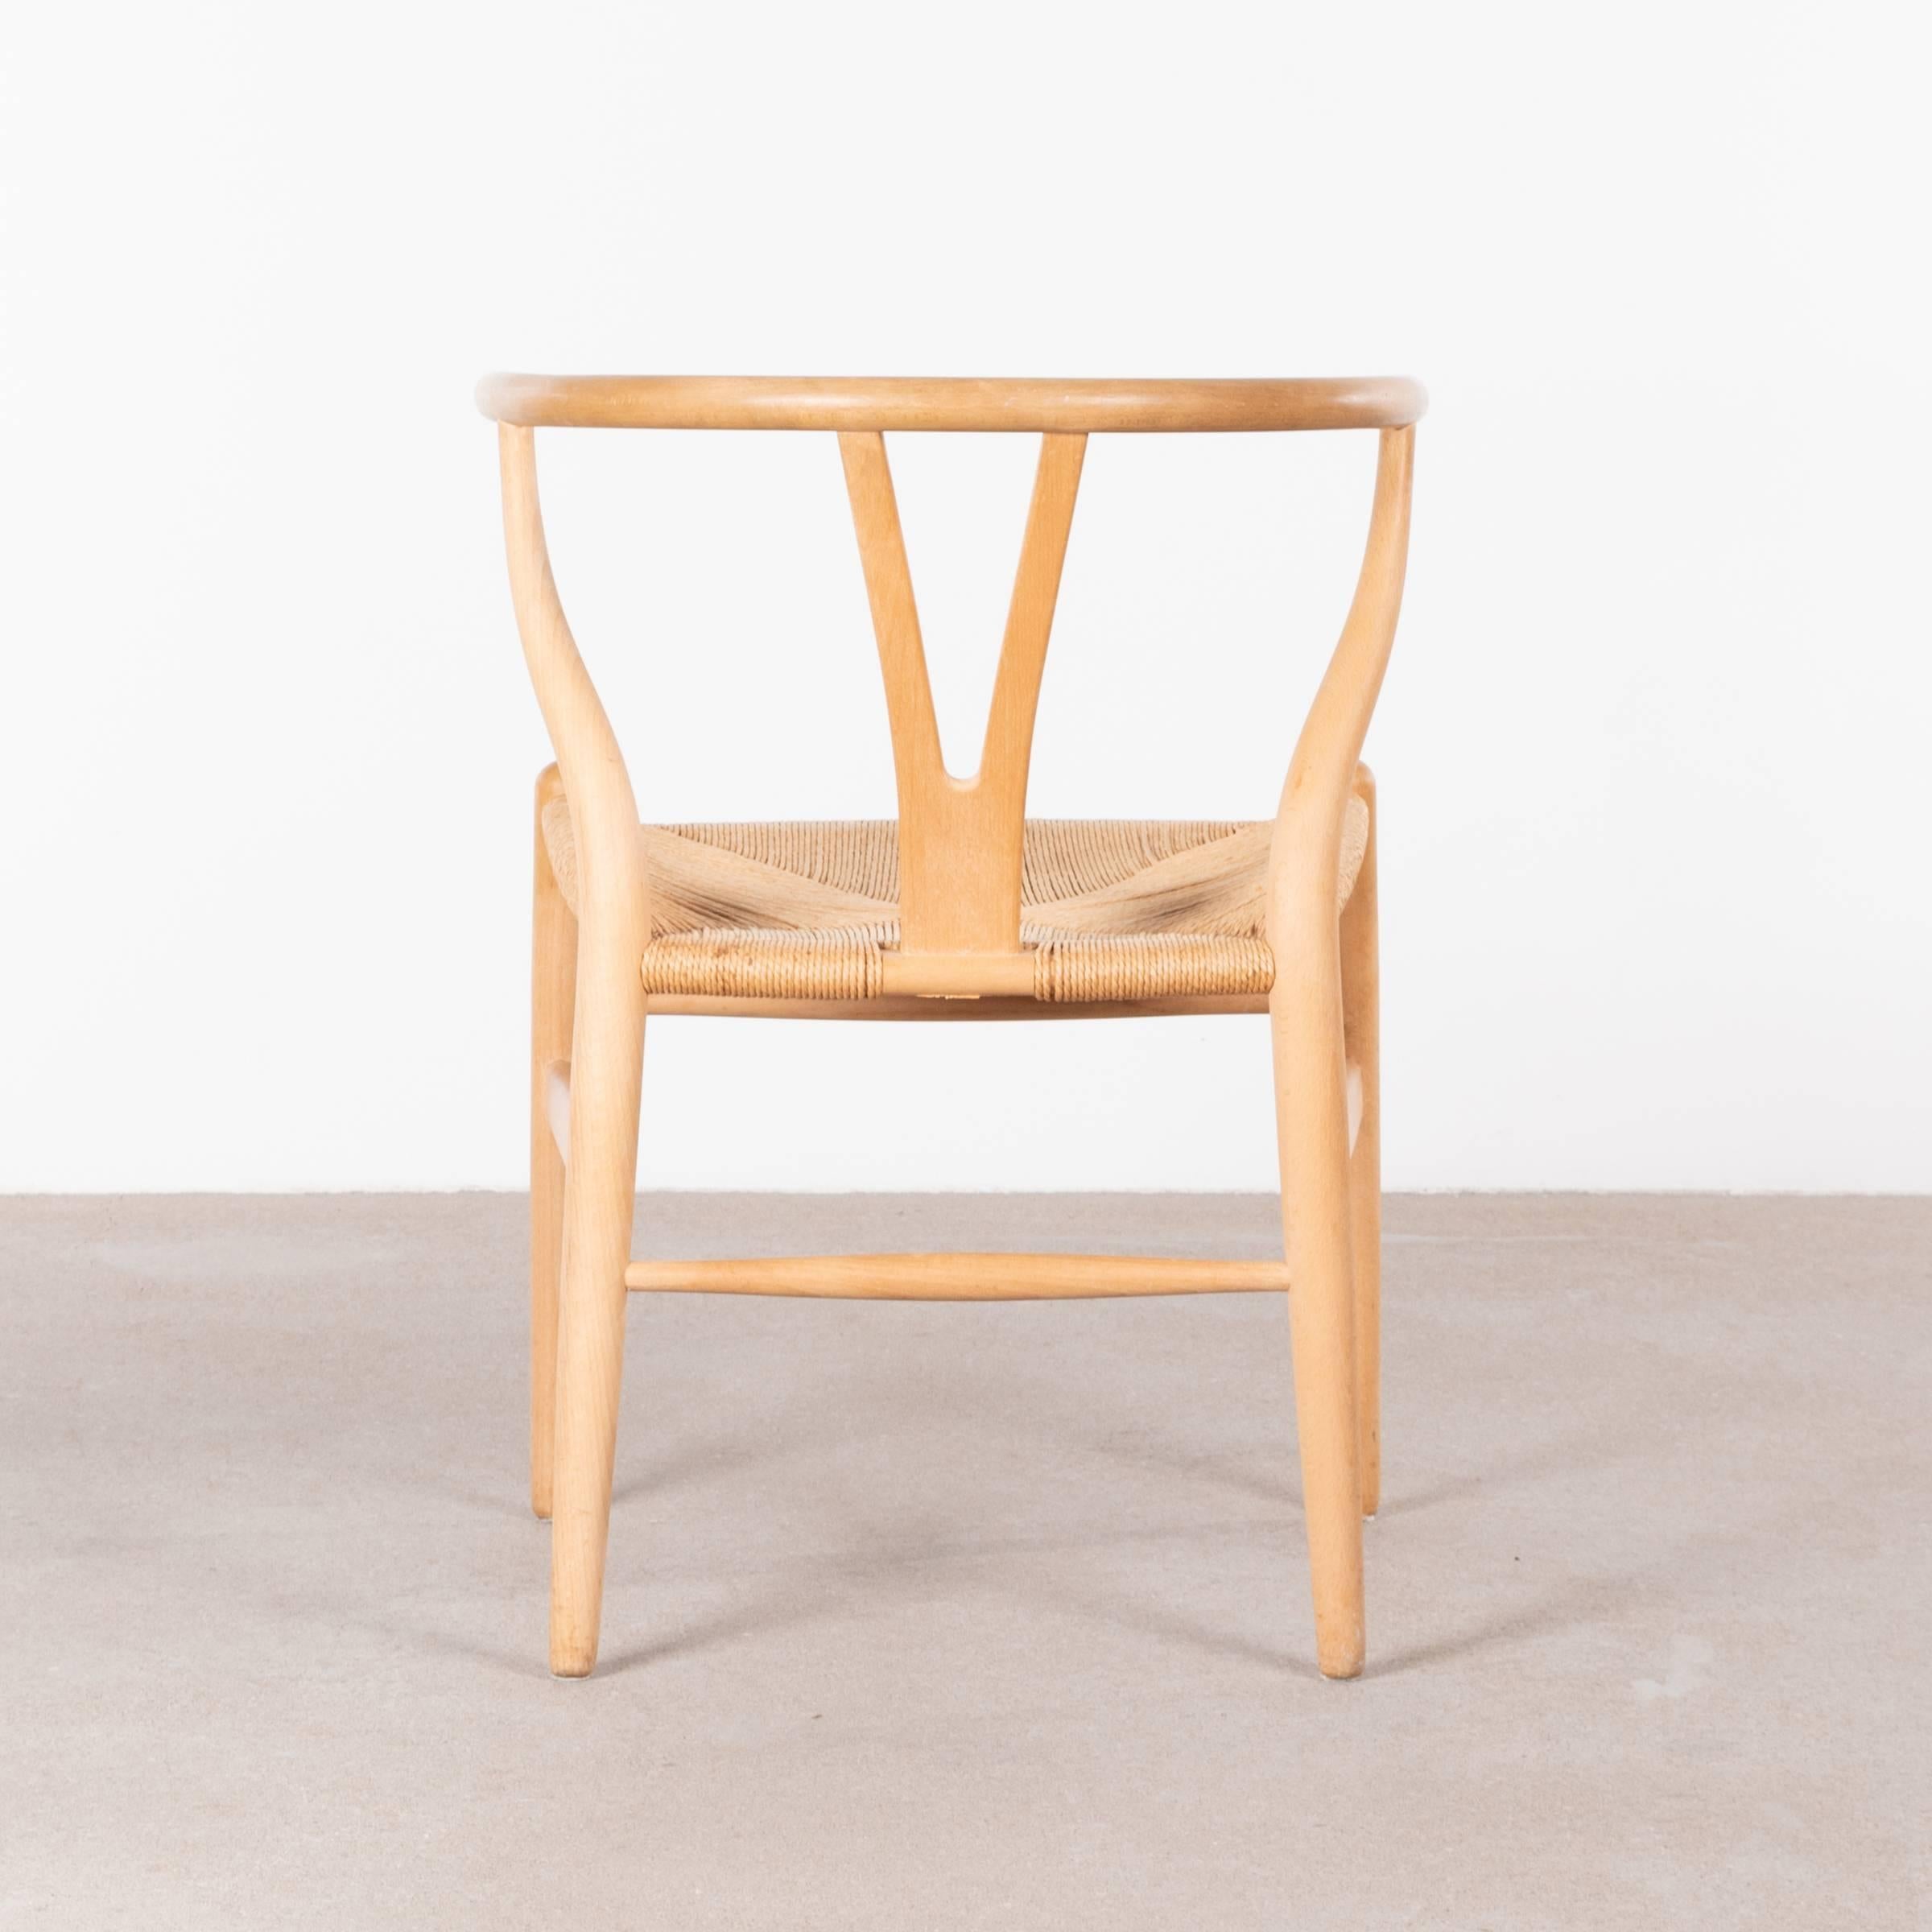 Mid-20th Century Wishbone Dining Chairs Model CH24 by Hans Wagner for Carl Hansen & Søn, Denmark